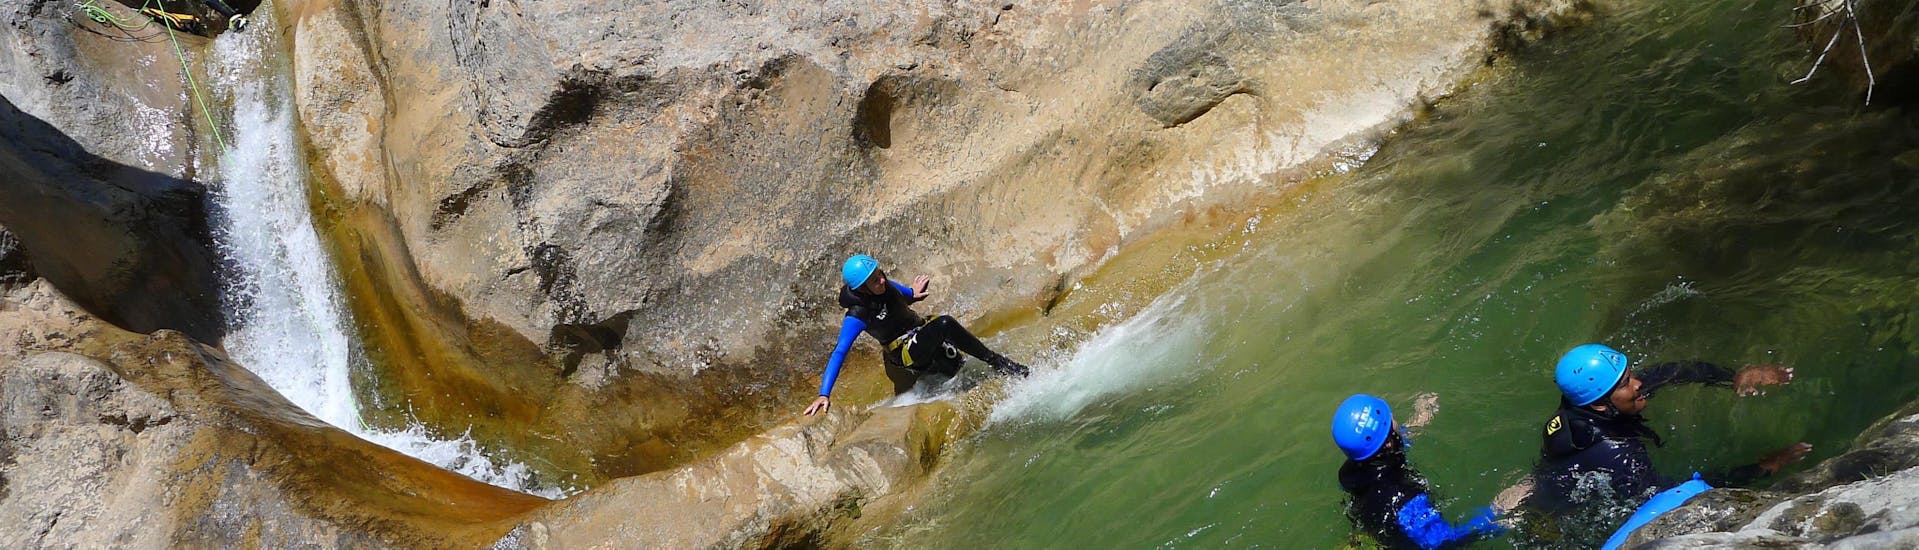 A girl is abseiling in the Canyon d'Arlos during the Canyoning Discovery with H2O vives.